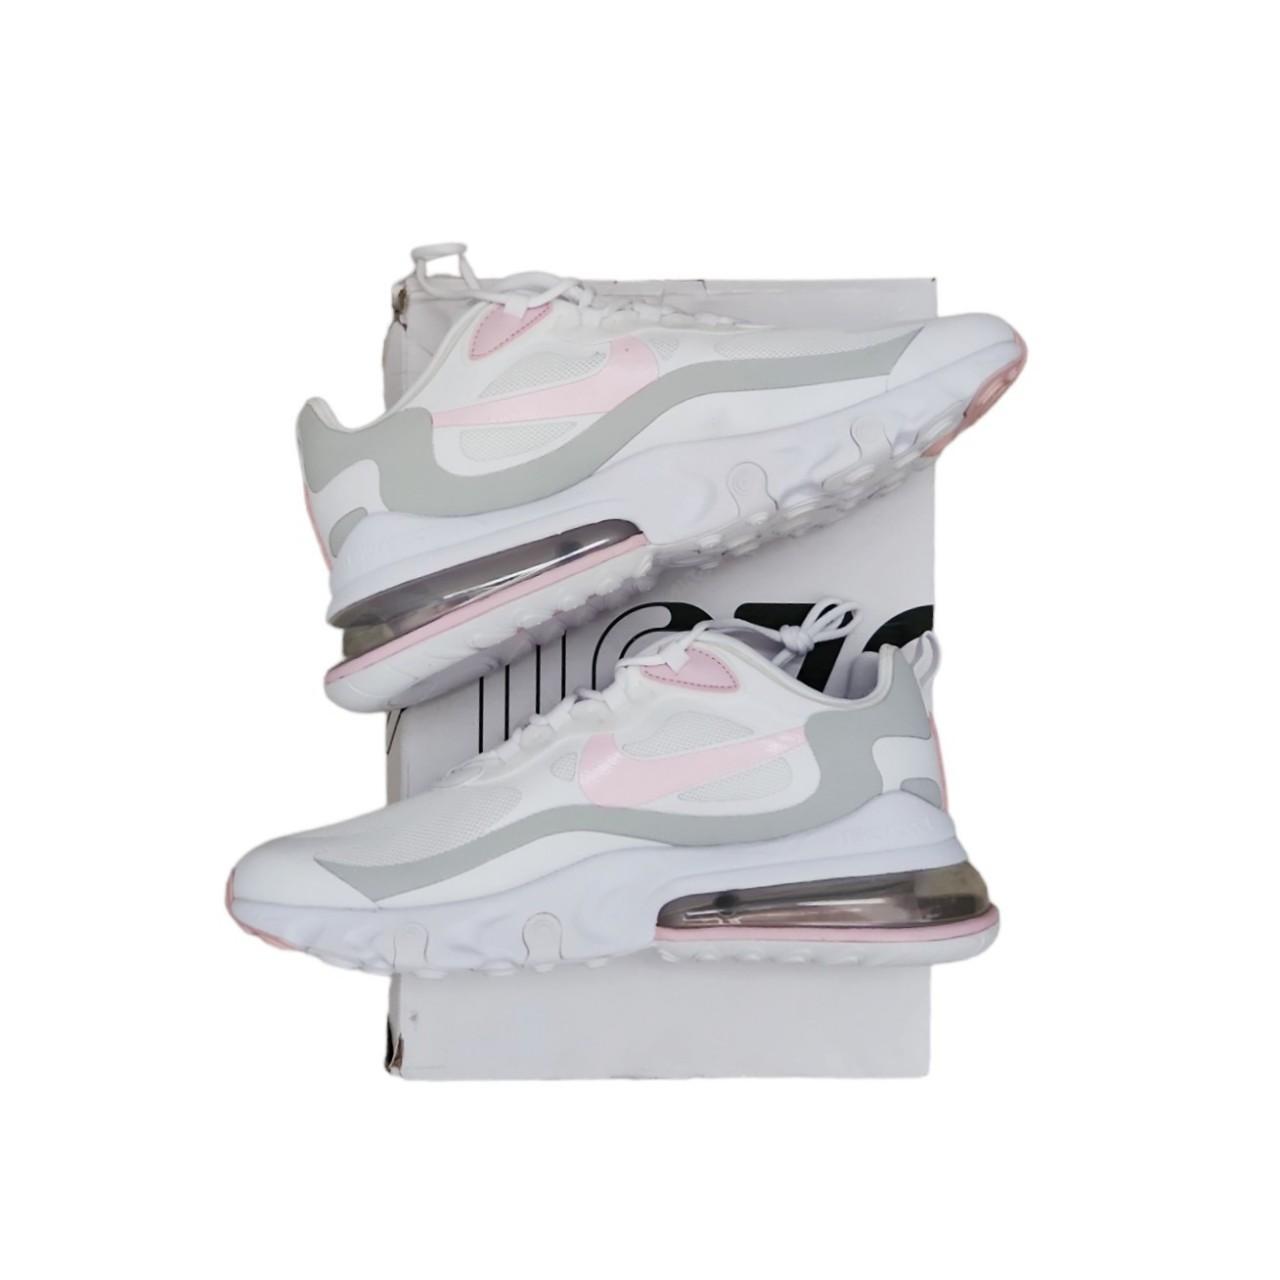 Nike Air Max 270 React white pink and black trainers